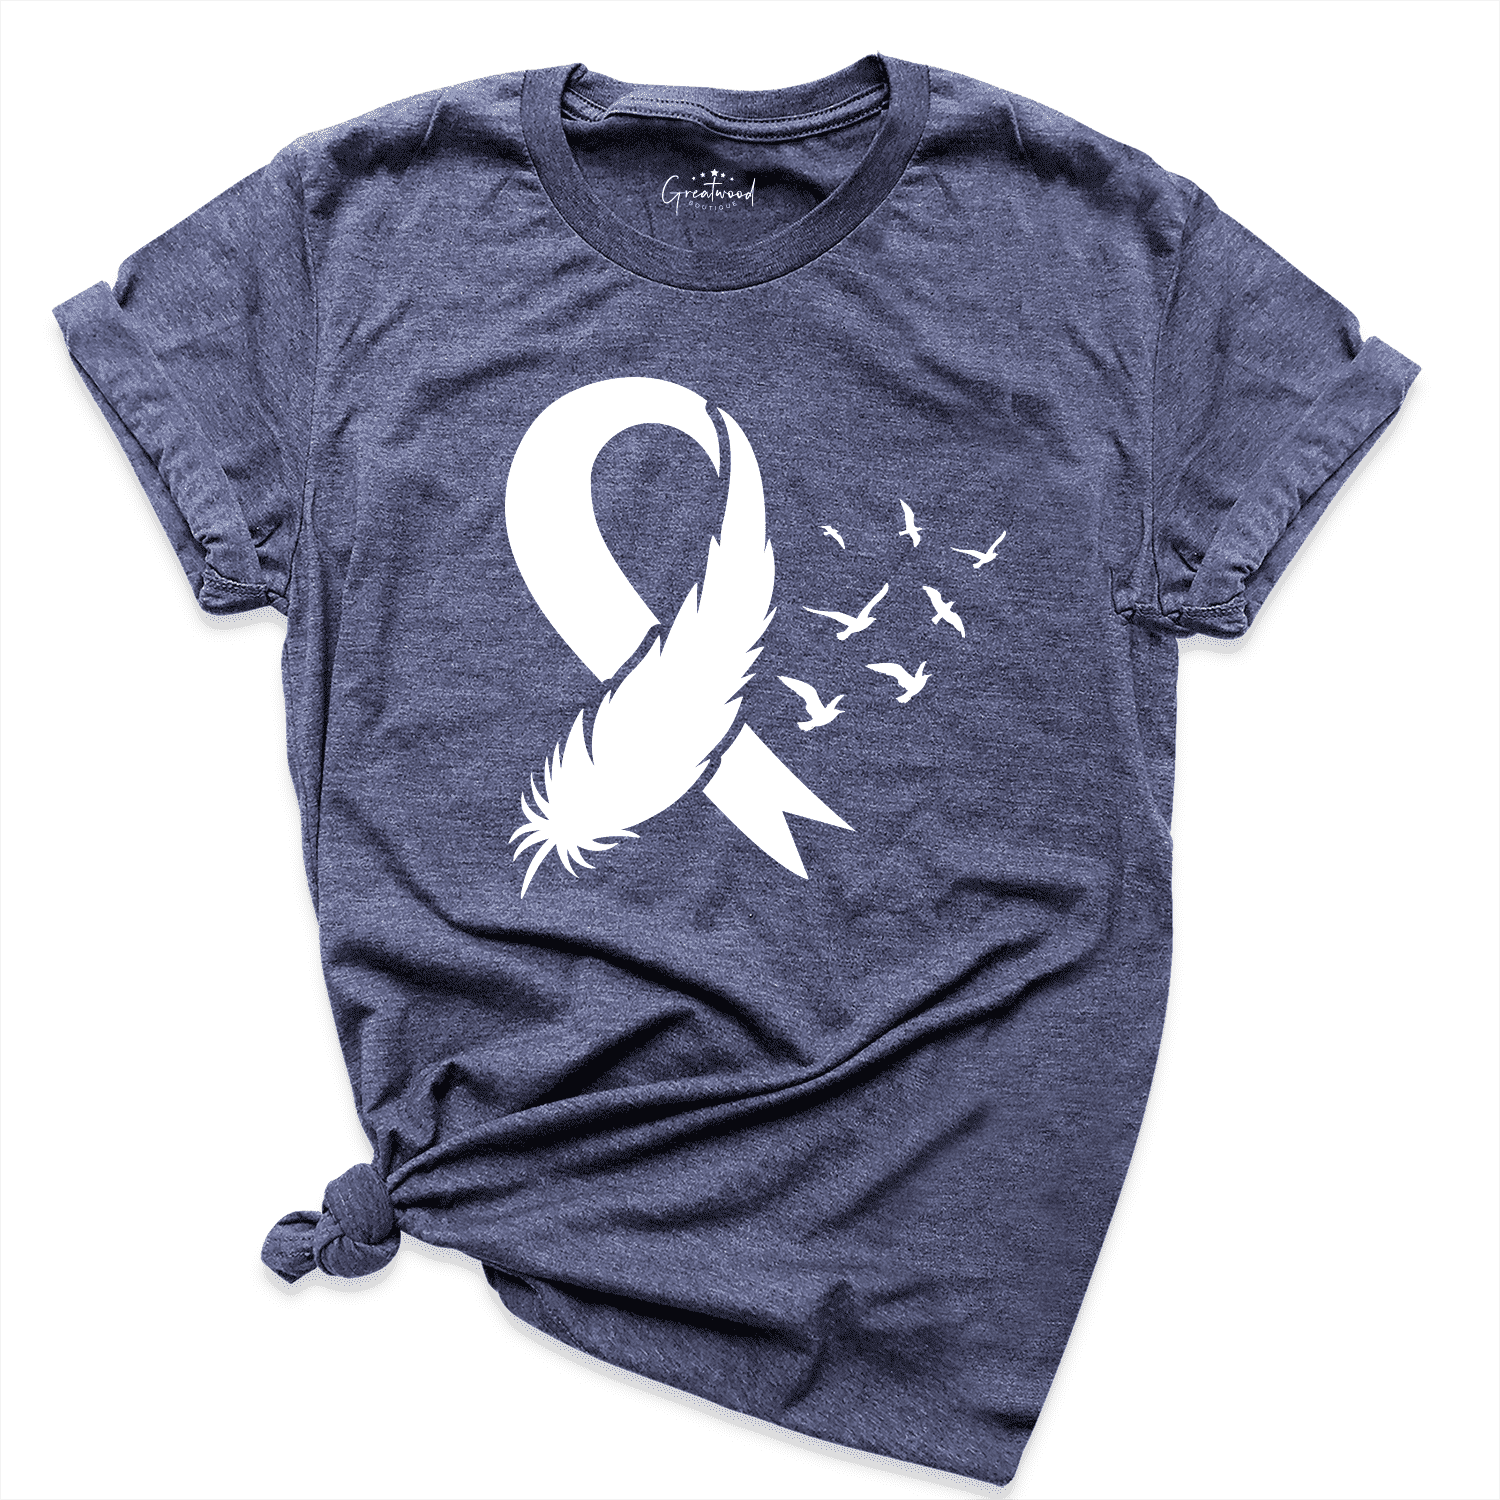 Breast Cancer Ribbon Shirt Navy - Greatwood Boutique